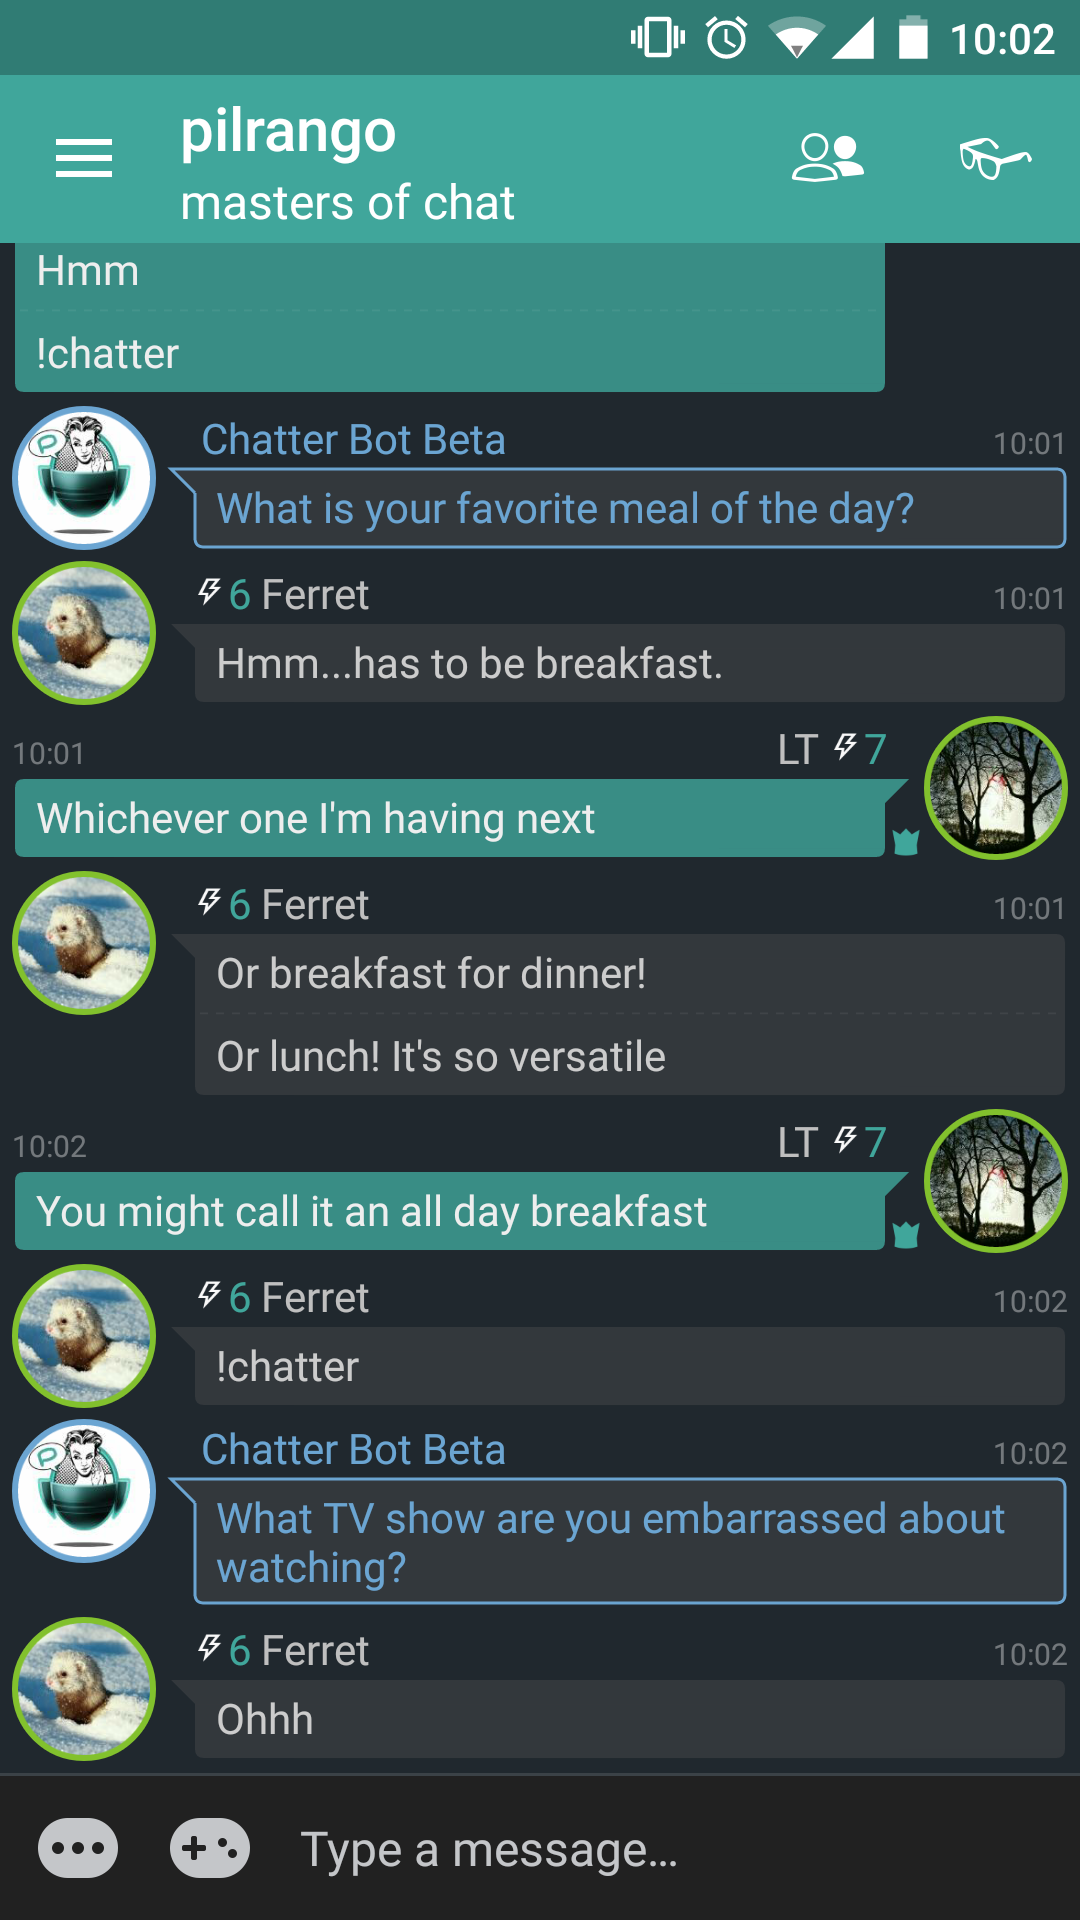 Chatter Bot